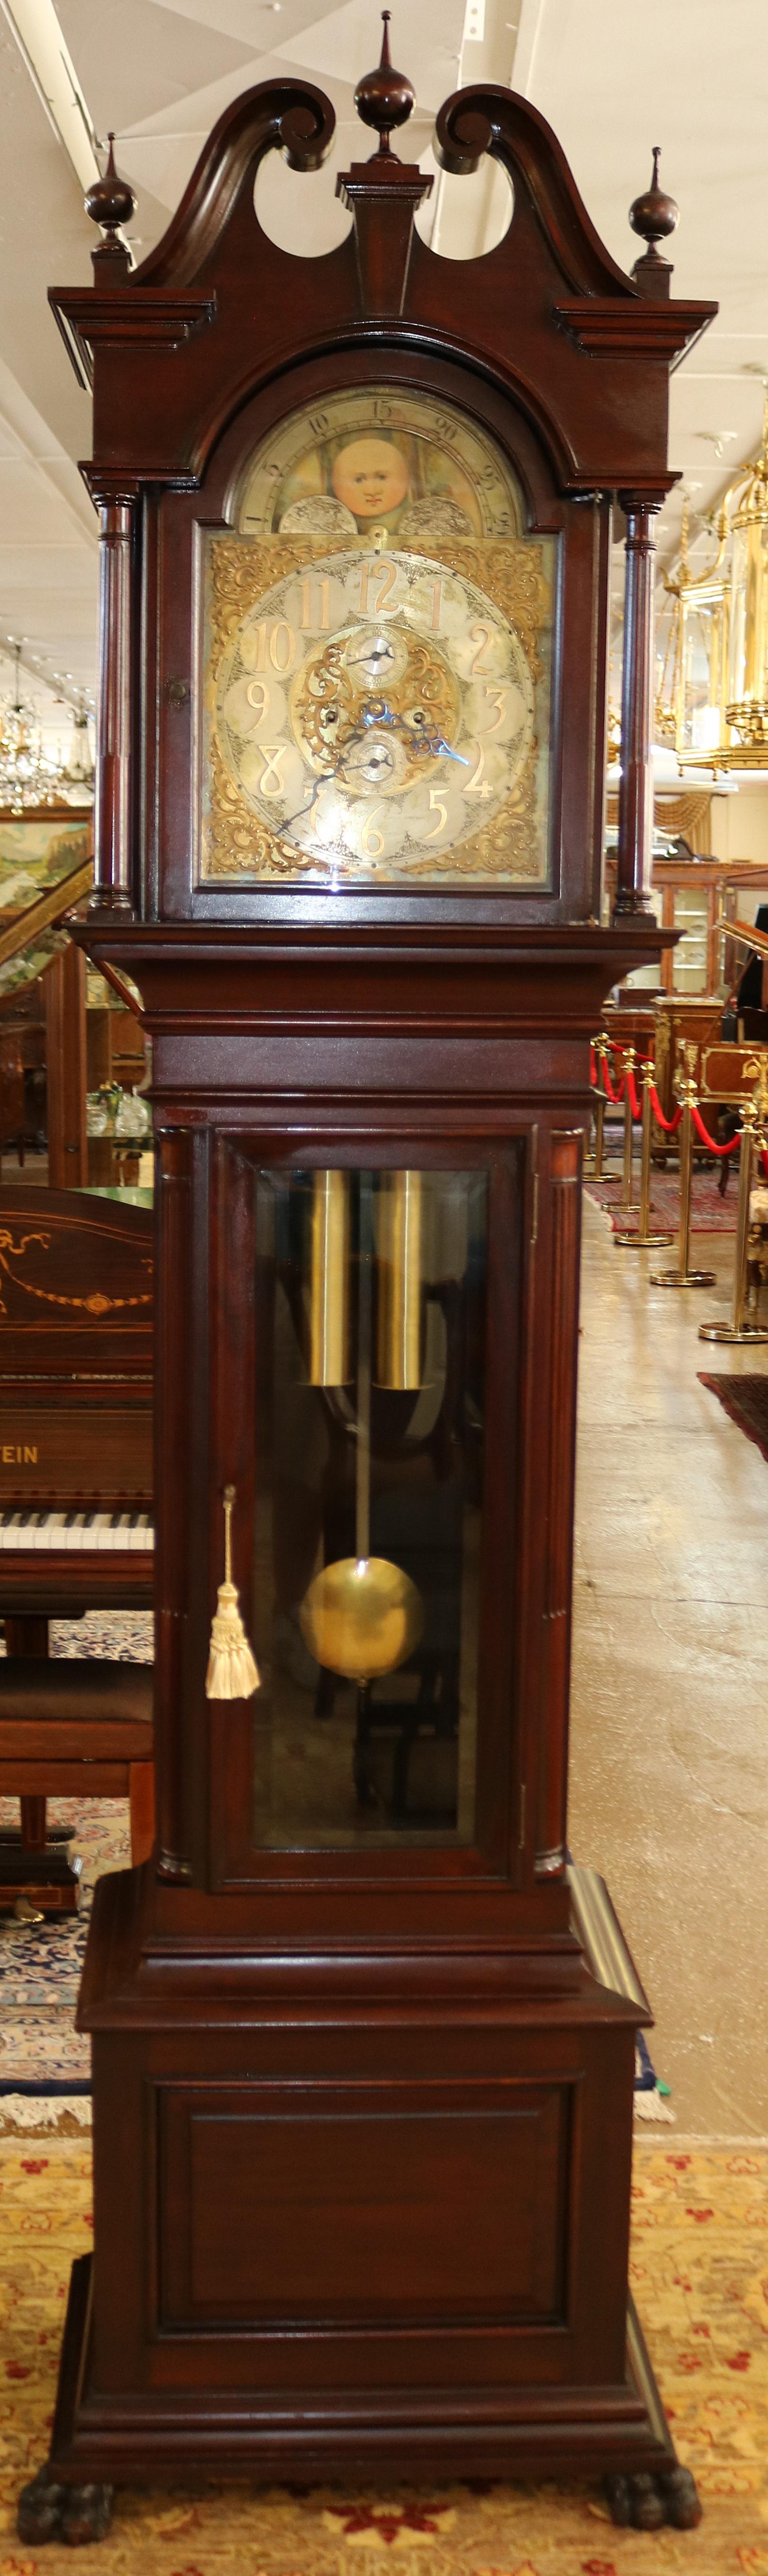 Bailey Banks & Biddle Mahogany Federal Style Case Tall Case Grandfather Clock

Dimensions : 97